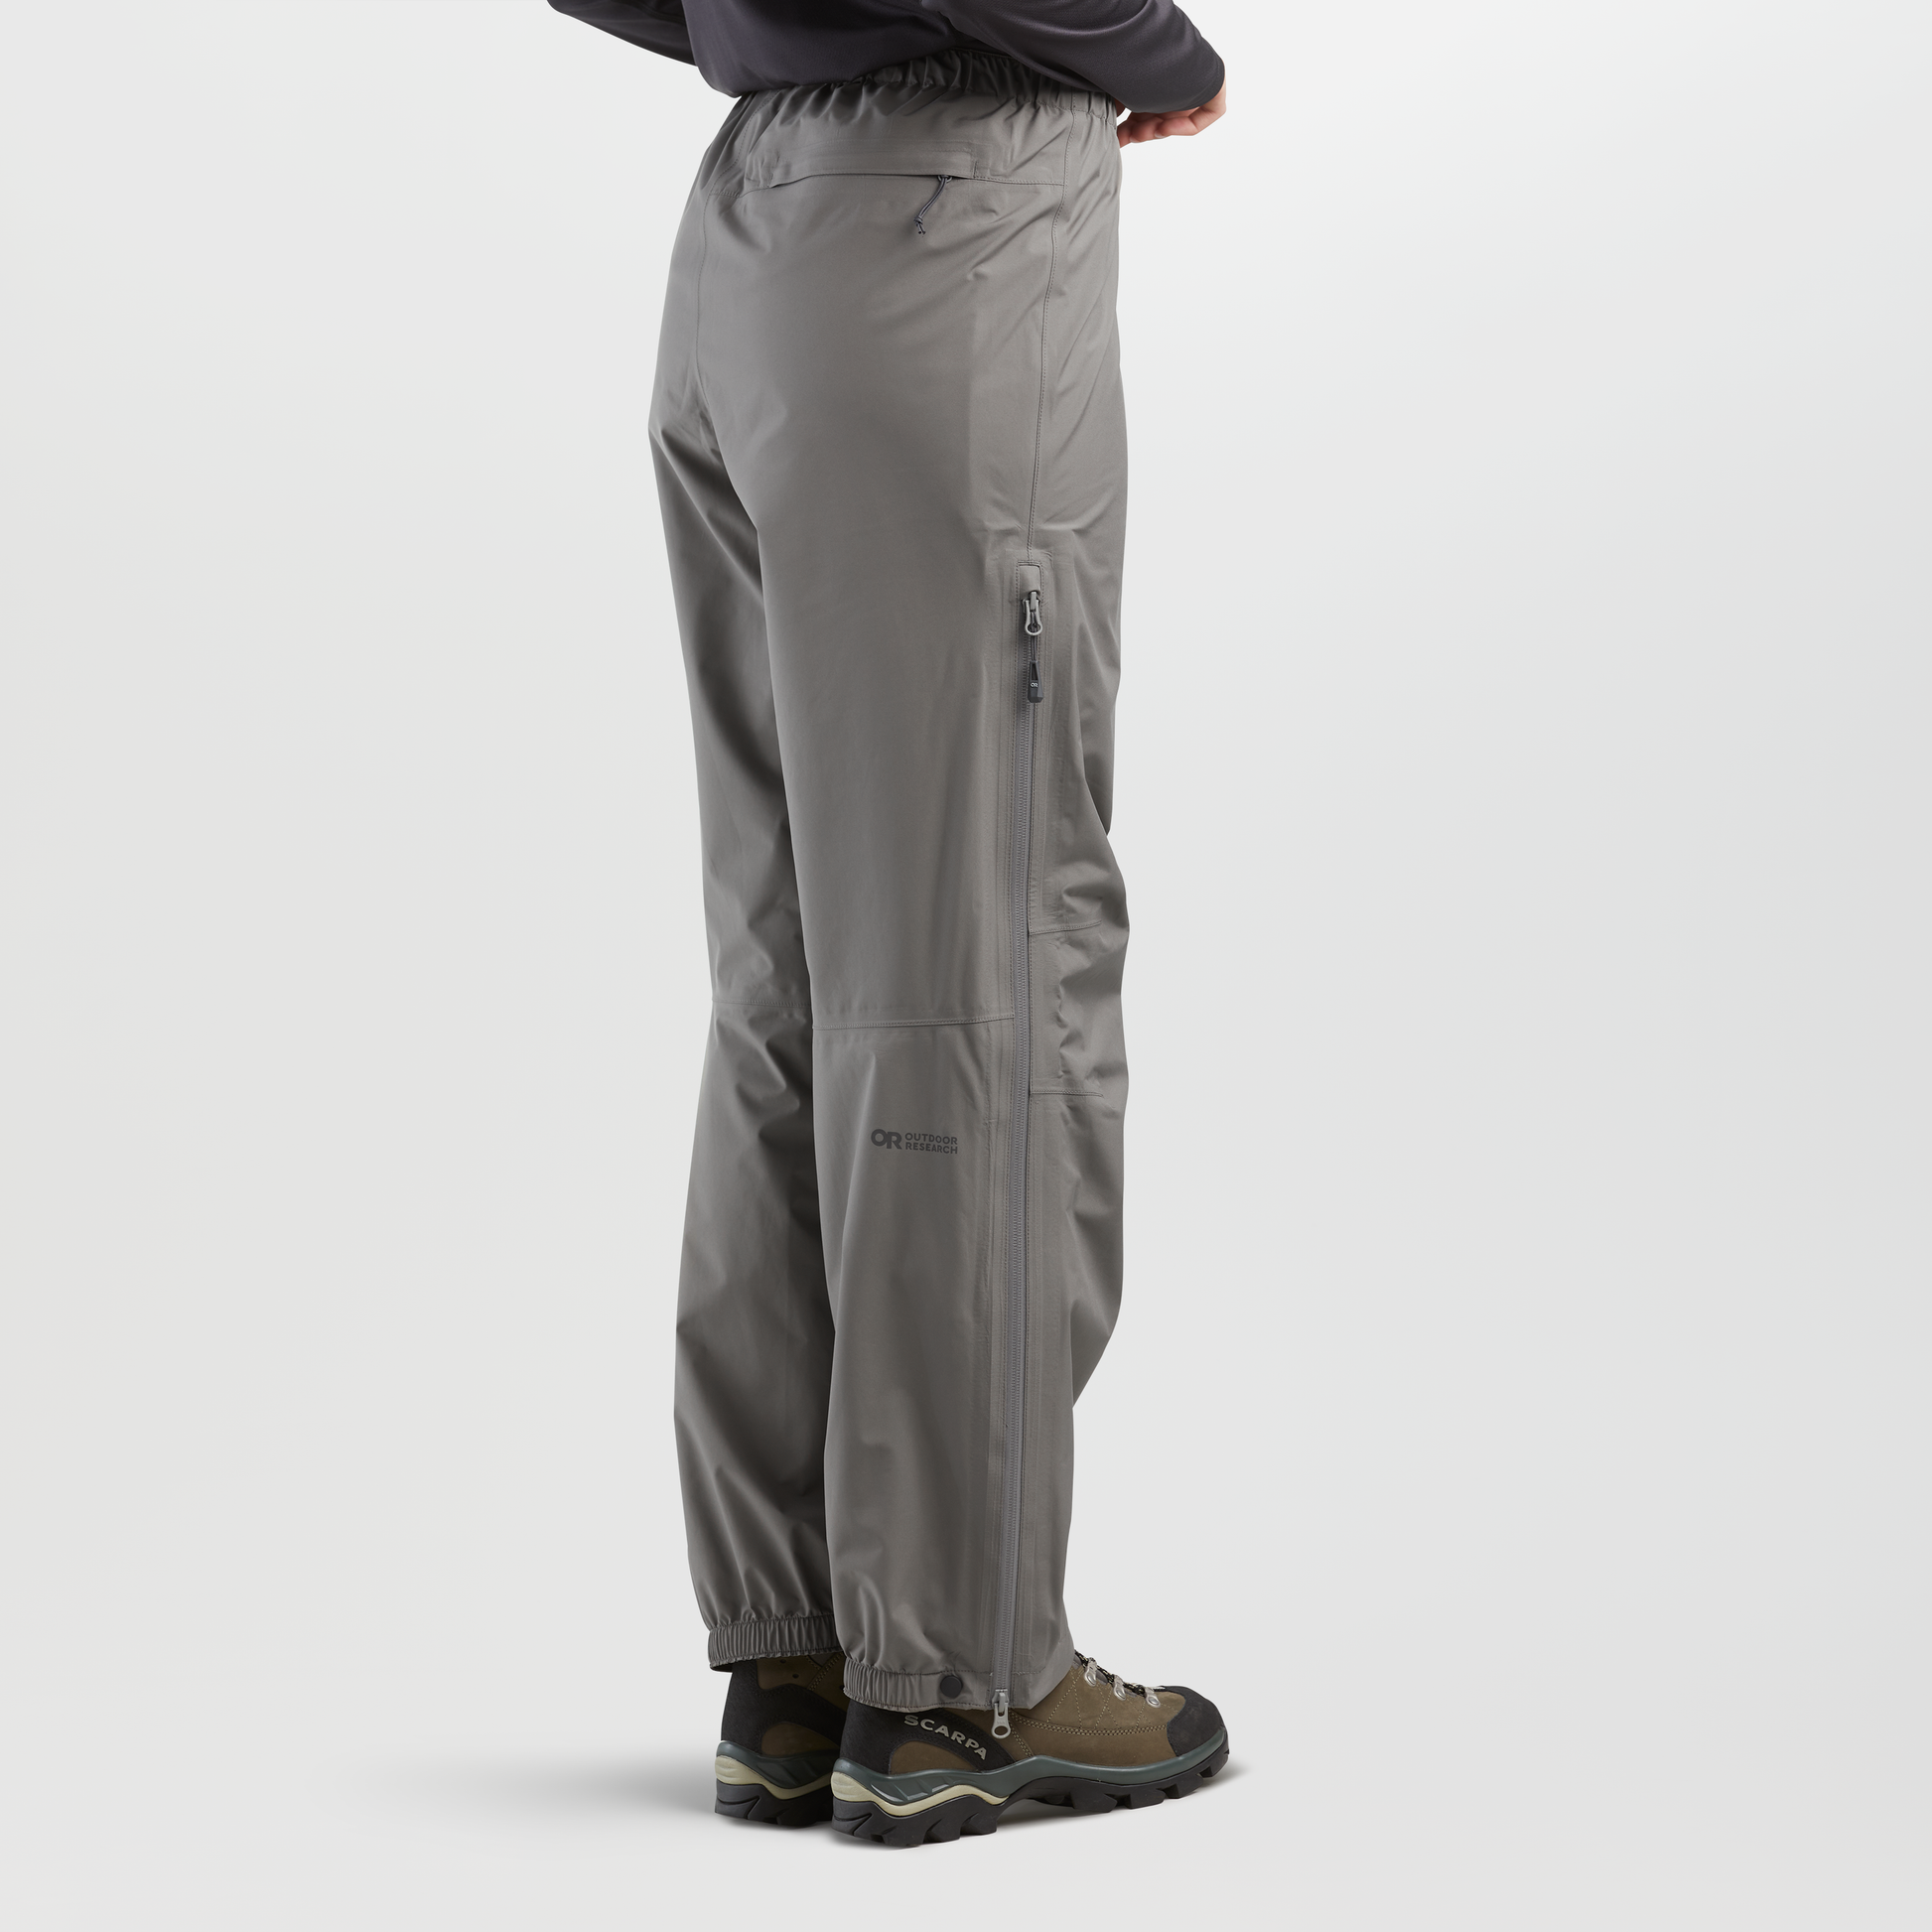 Packable Safety Rain Pant - Safety Supplies Canada